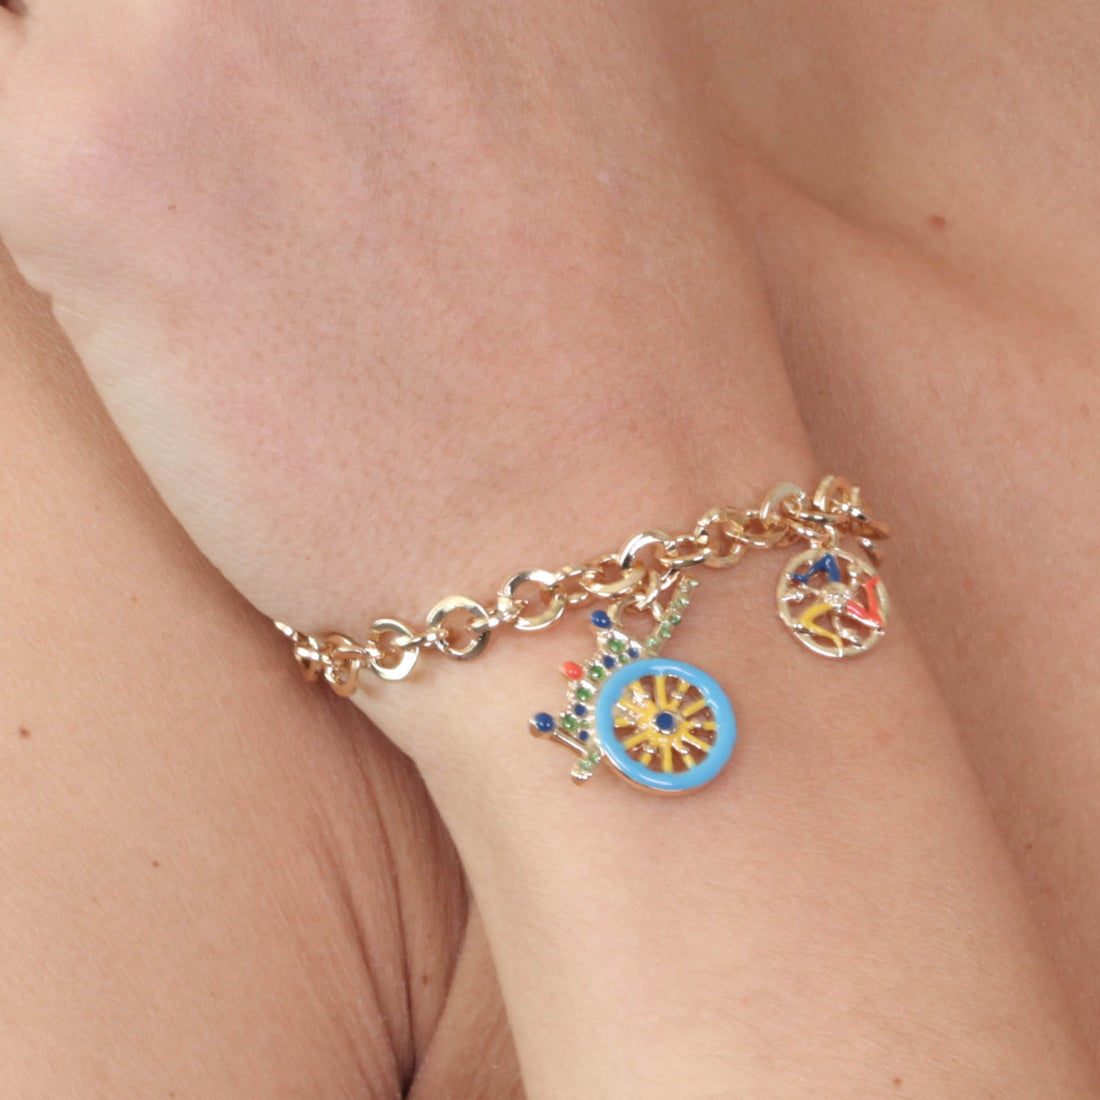 Rolò shirt metal bracelet, with a sloping Sicilian cart embellished with colored glazes